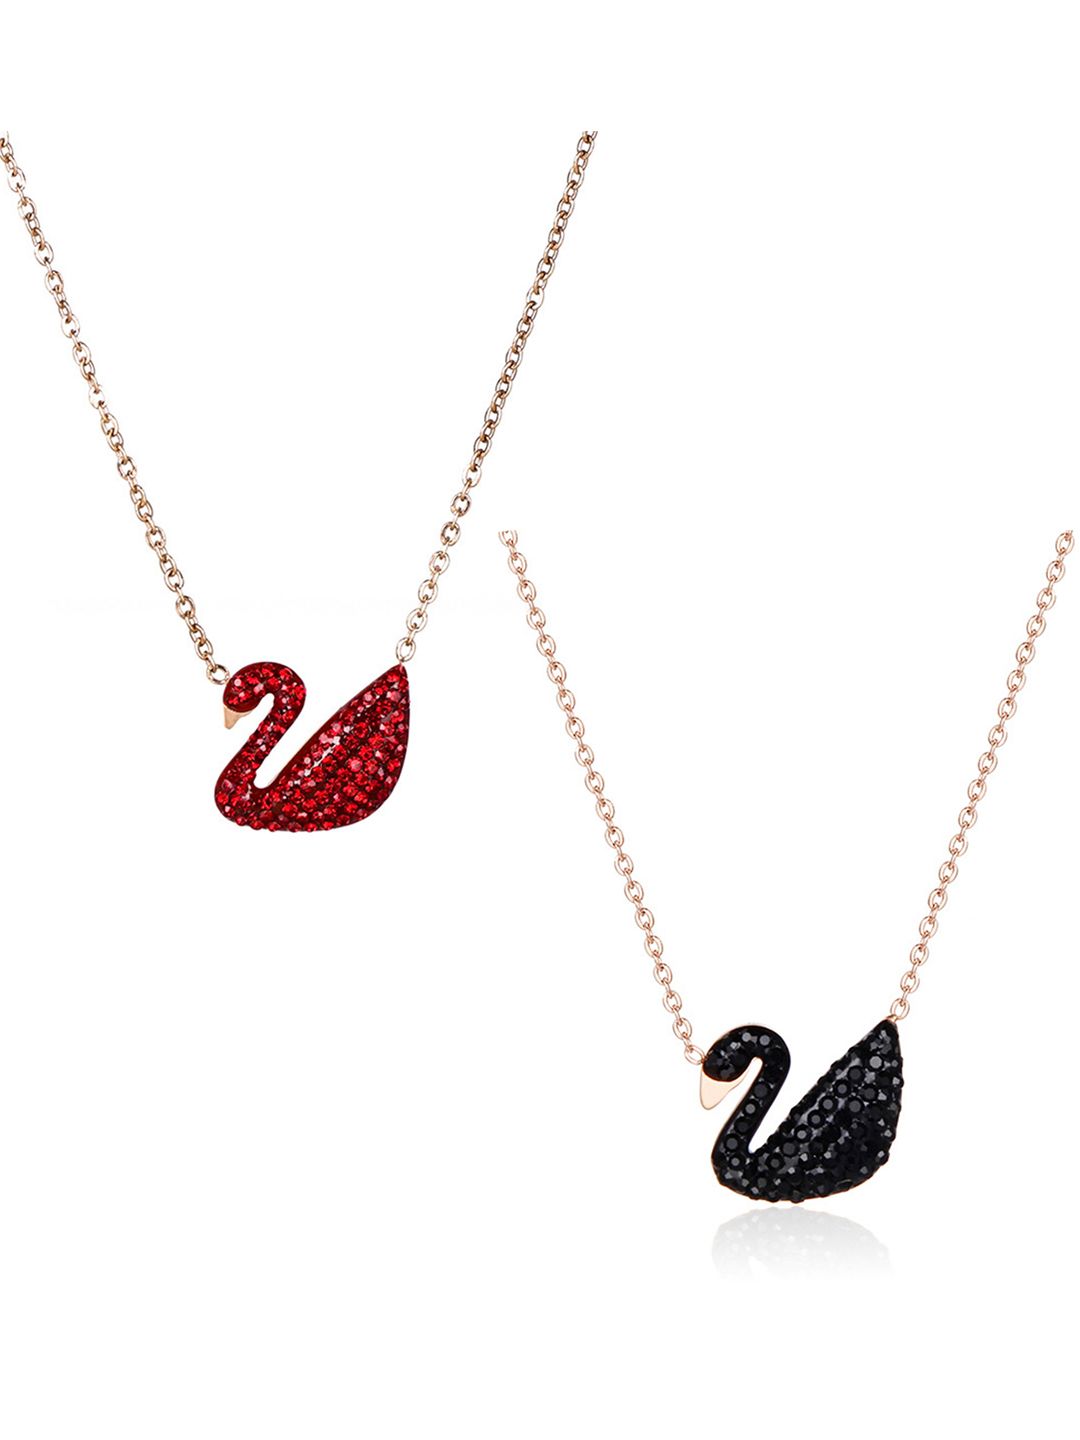 Vembley Set Of 2 Gold-Plated & Red Black Swan Pendant Necklace Price in India